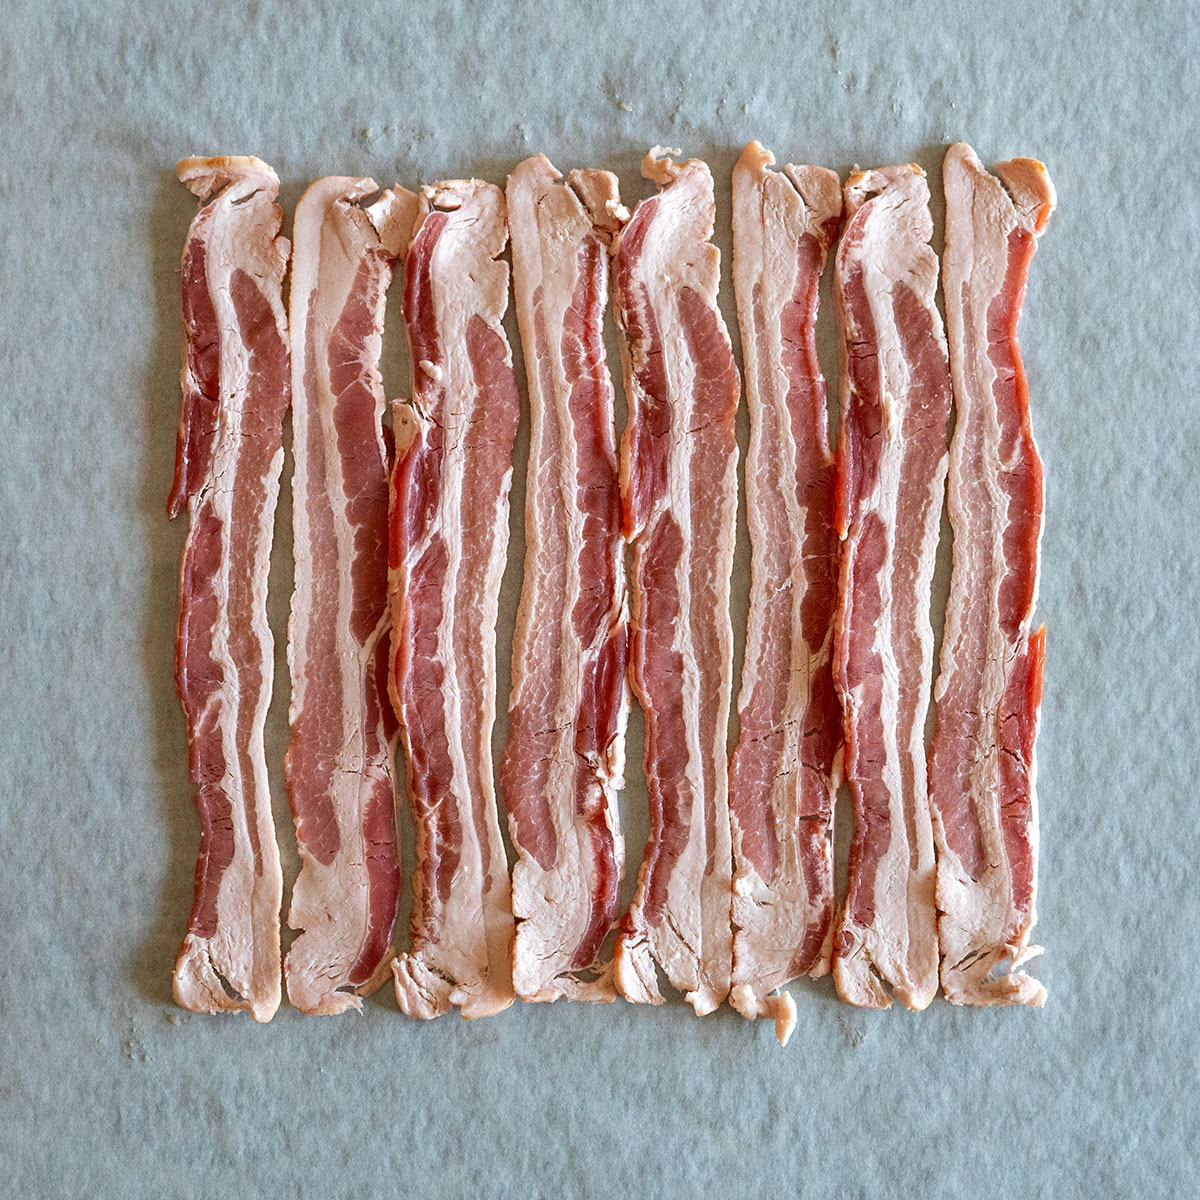 8 bacon slices side by side.